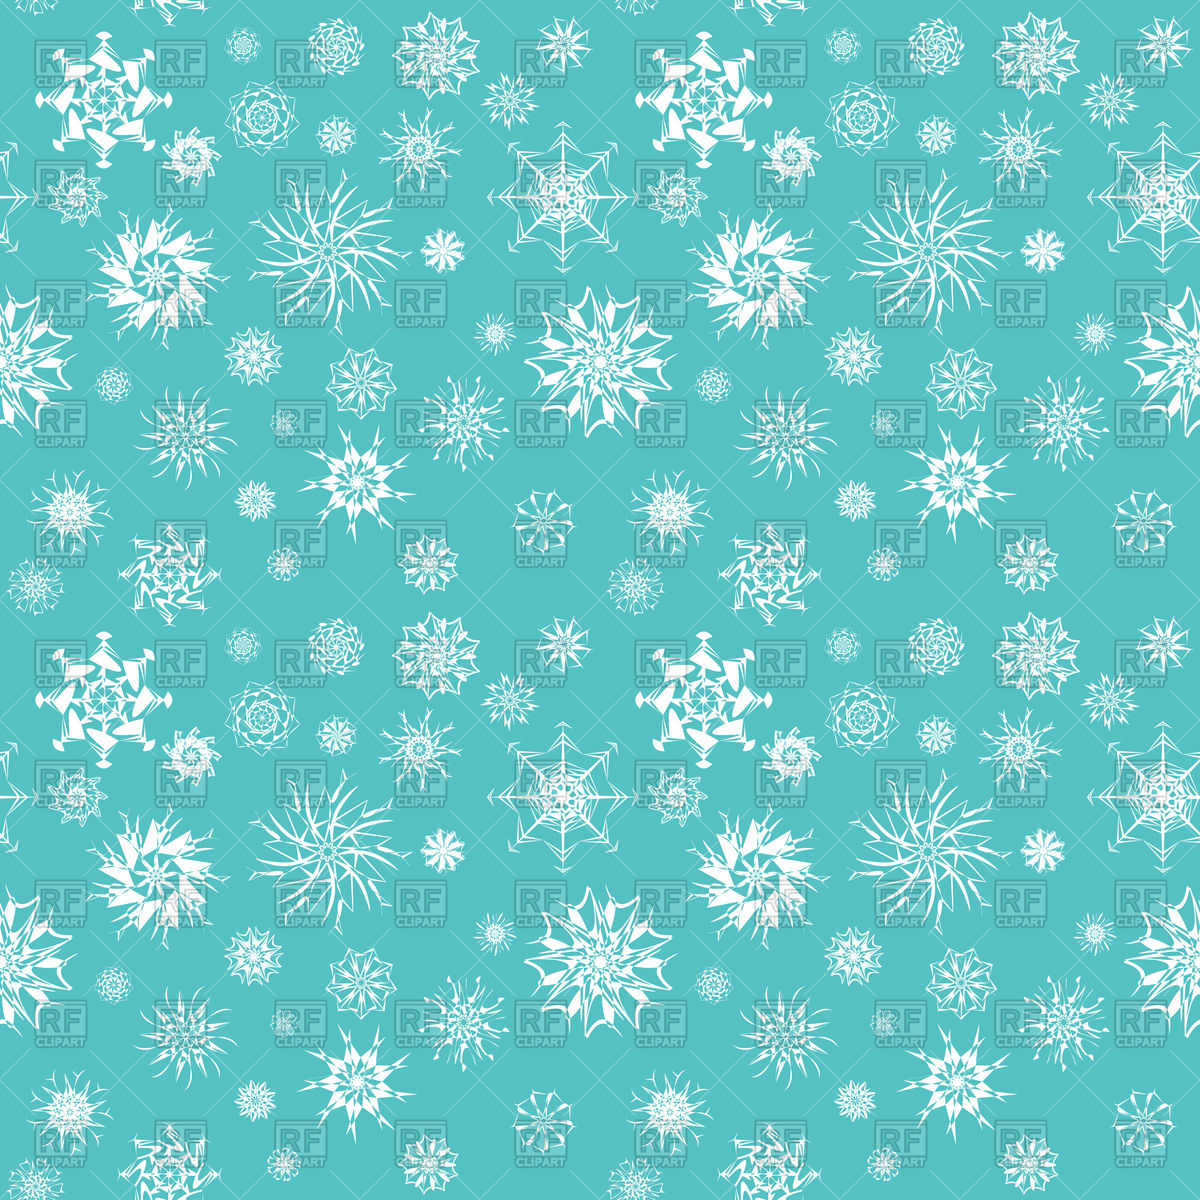 Different White Snowflakes Background Vector Image